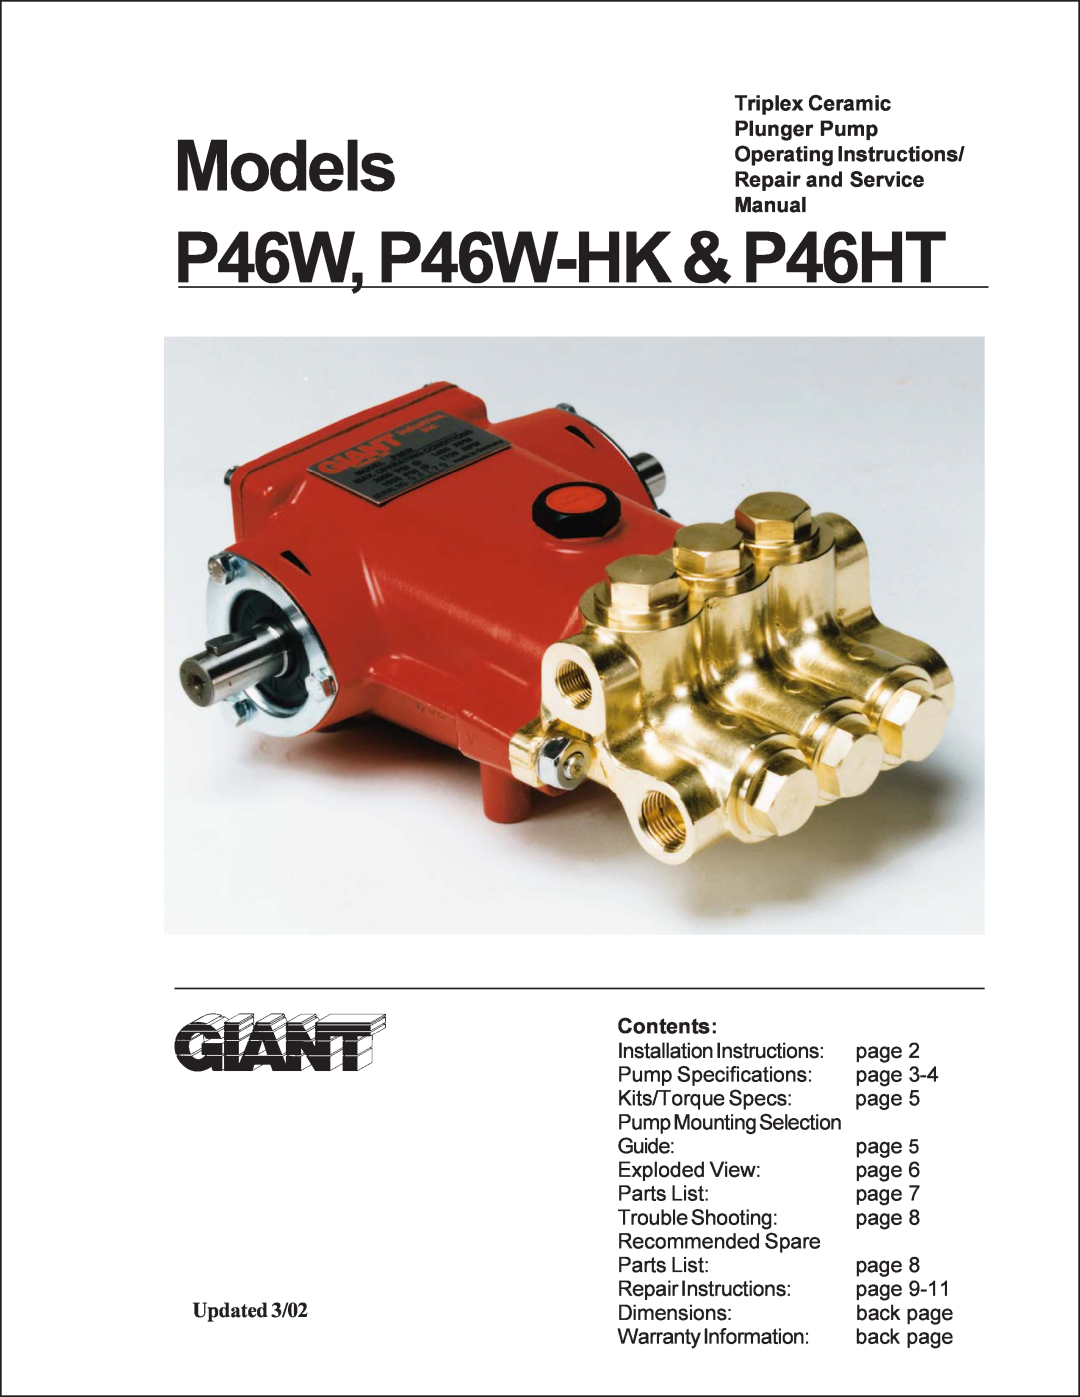 Giant p46w service manual Triplex Ceramic Plunger Pump Models Operating Instructions, Repair and Service Manual, Contents 